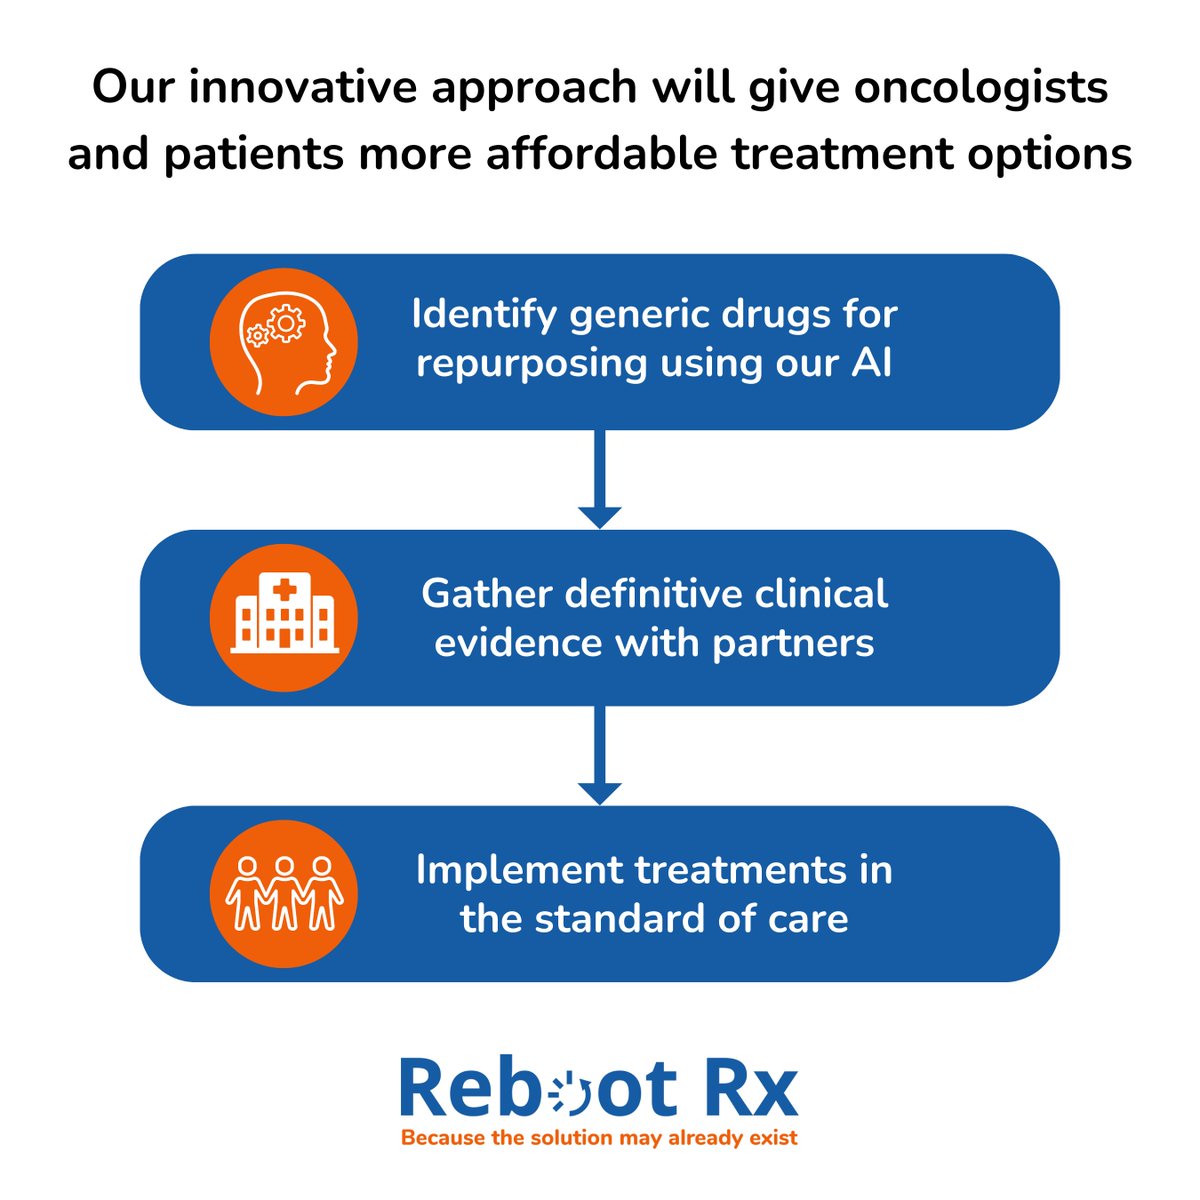 Our AI tech found over 80 generic drugs tested for treating #prostatecancer. Through rigorous manual validation, we whittled it down to the drugs with the strongest evidence and are now determining a pathway to advance them into the standard of care. #ProstateCancerAwarenessMonth